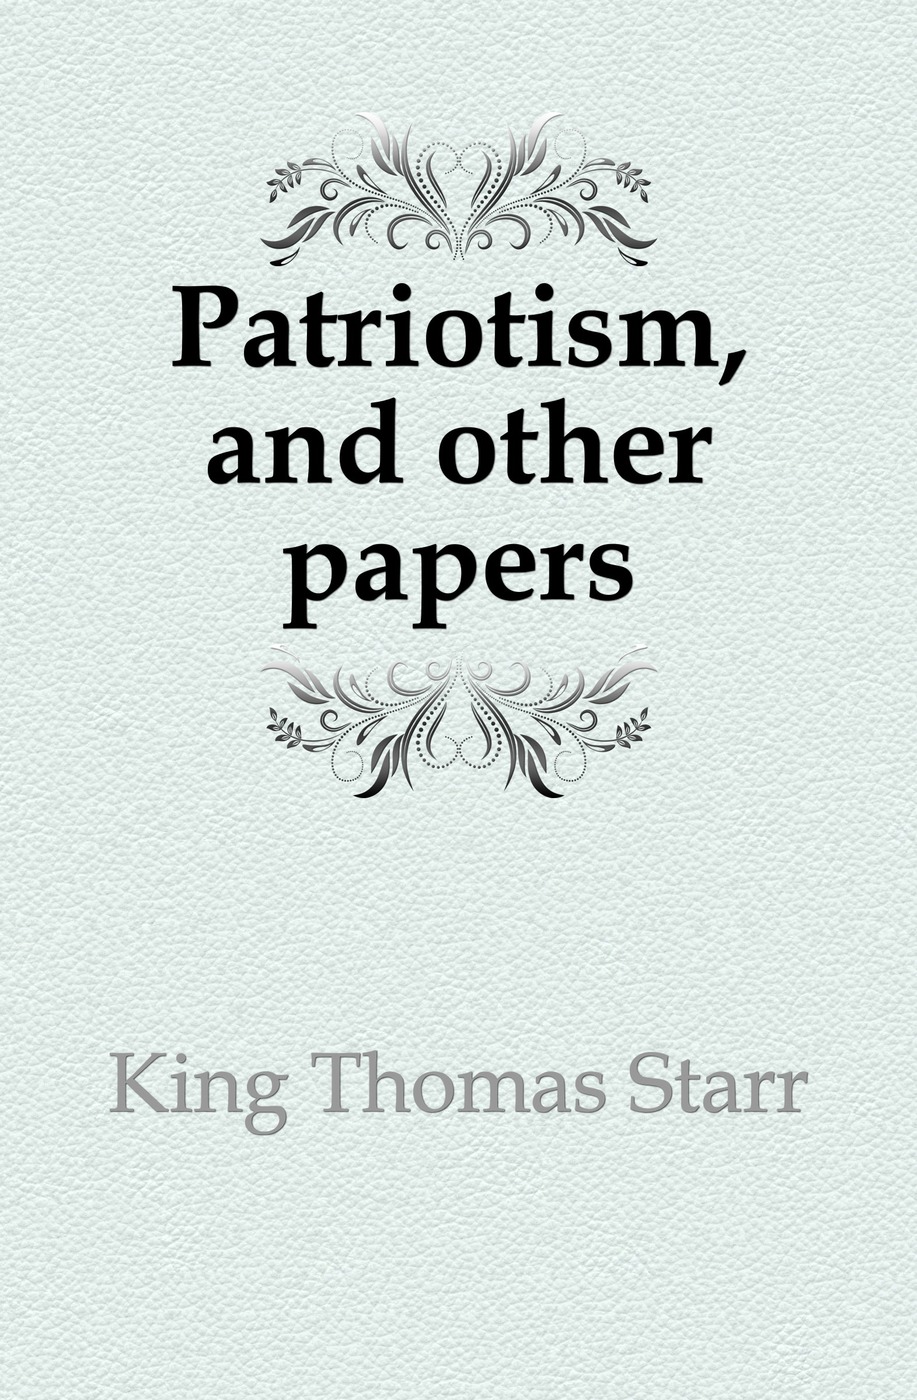 Patriotism, and other papers